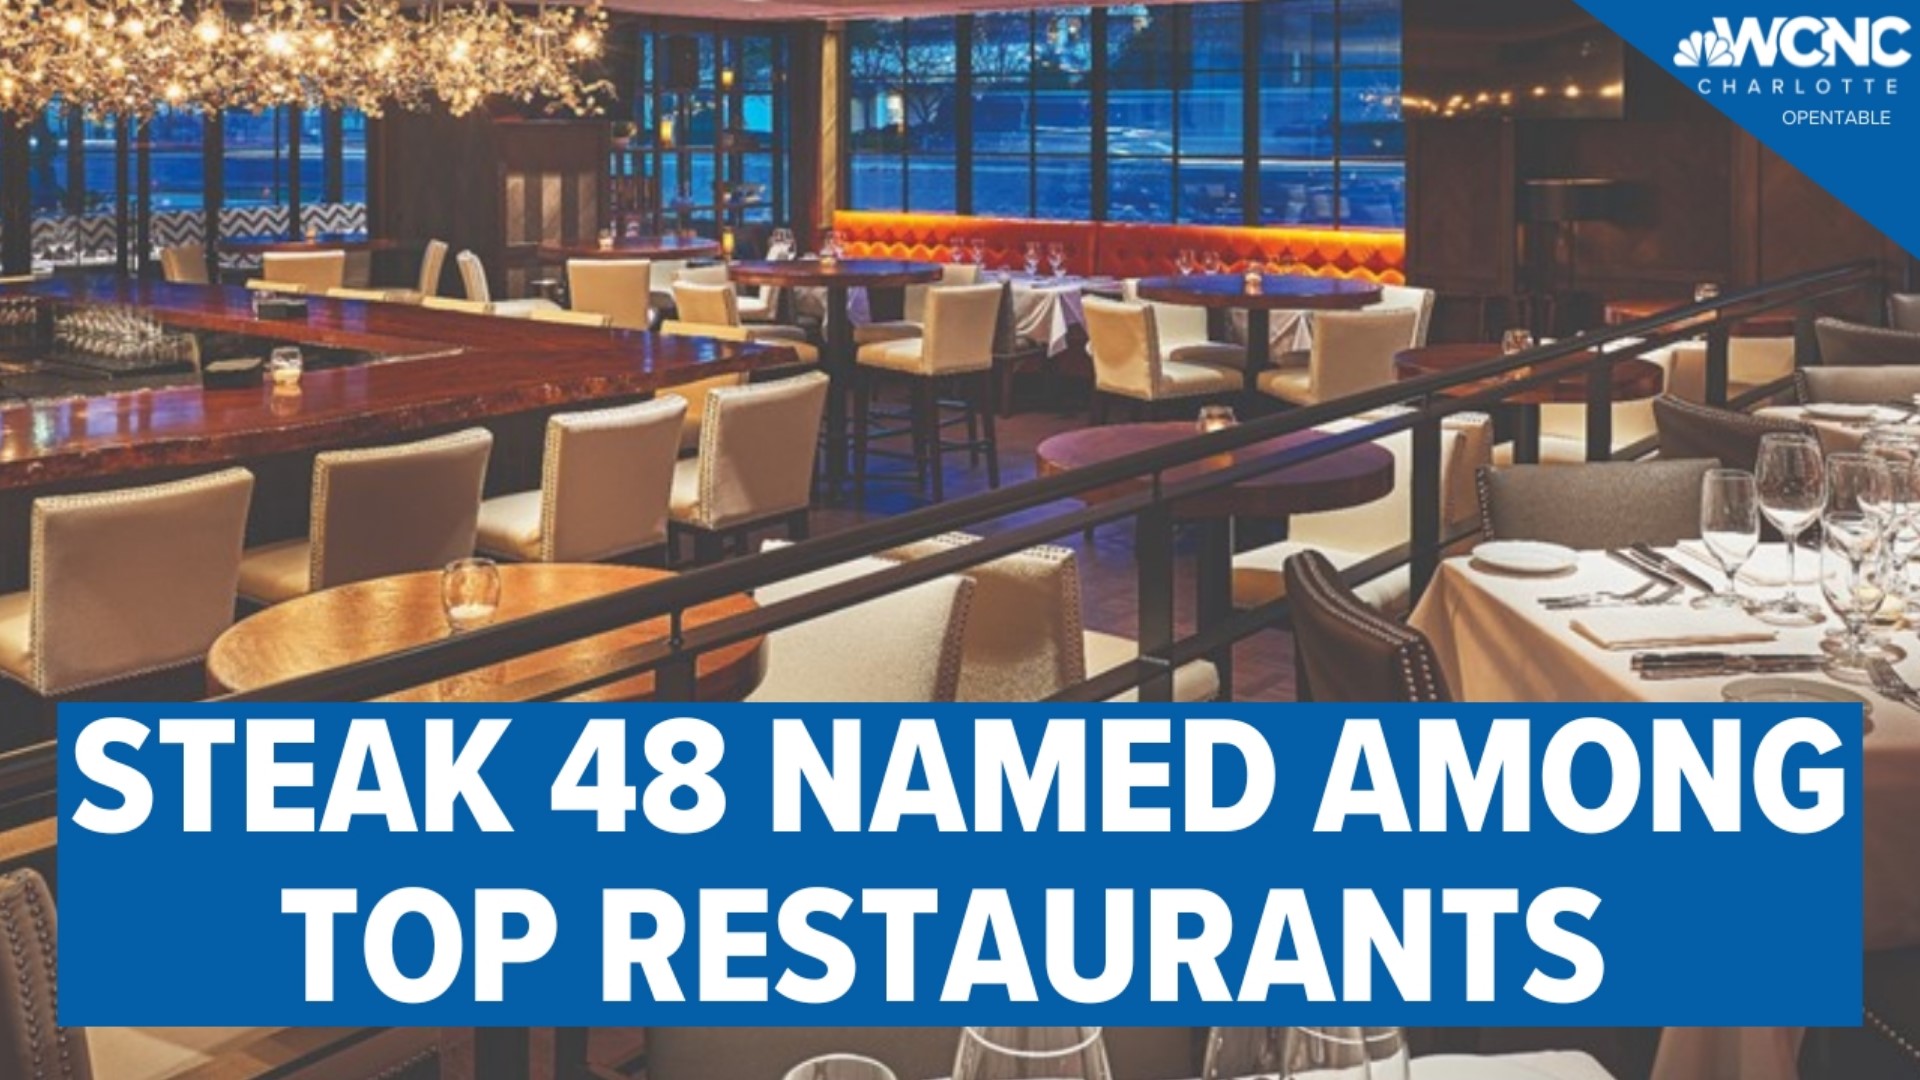 A Charlotte restaurant is among the top 100  across the US as selected by OpenTable diners.